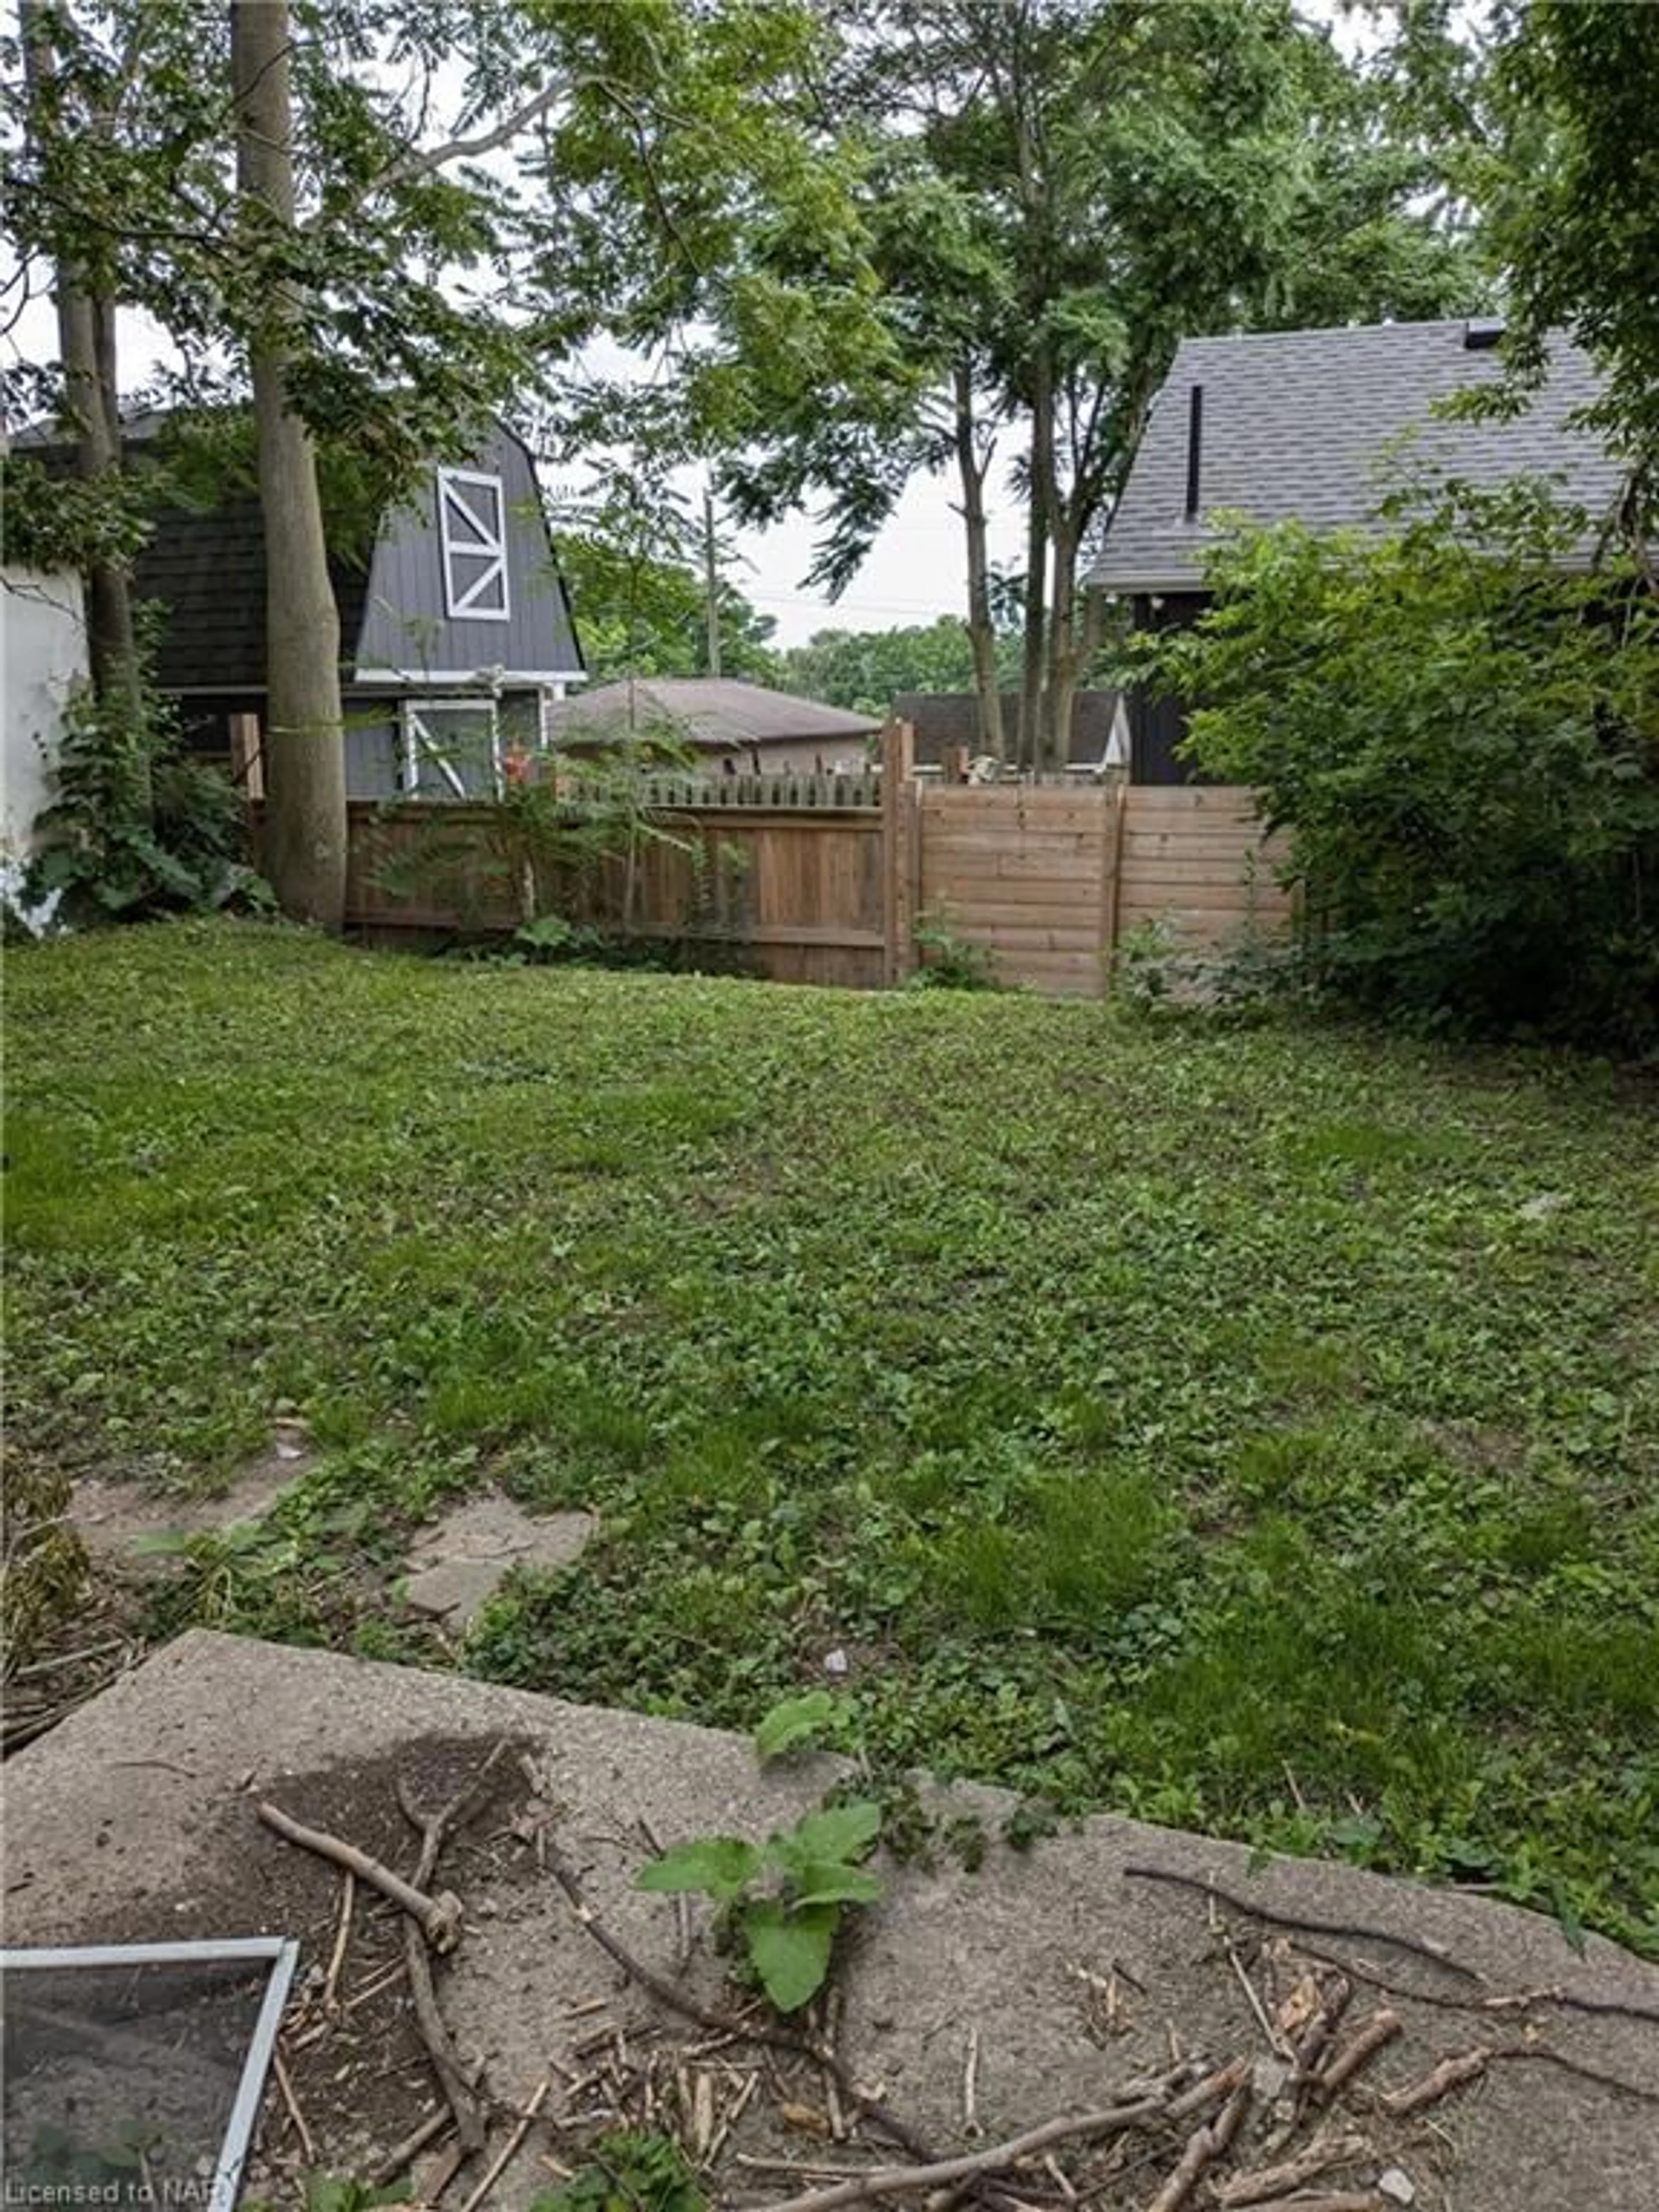 Fenced yard for 44.5 Division St, St. Catharines Ontario L2R 3G5